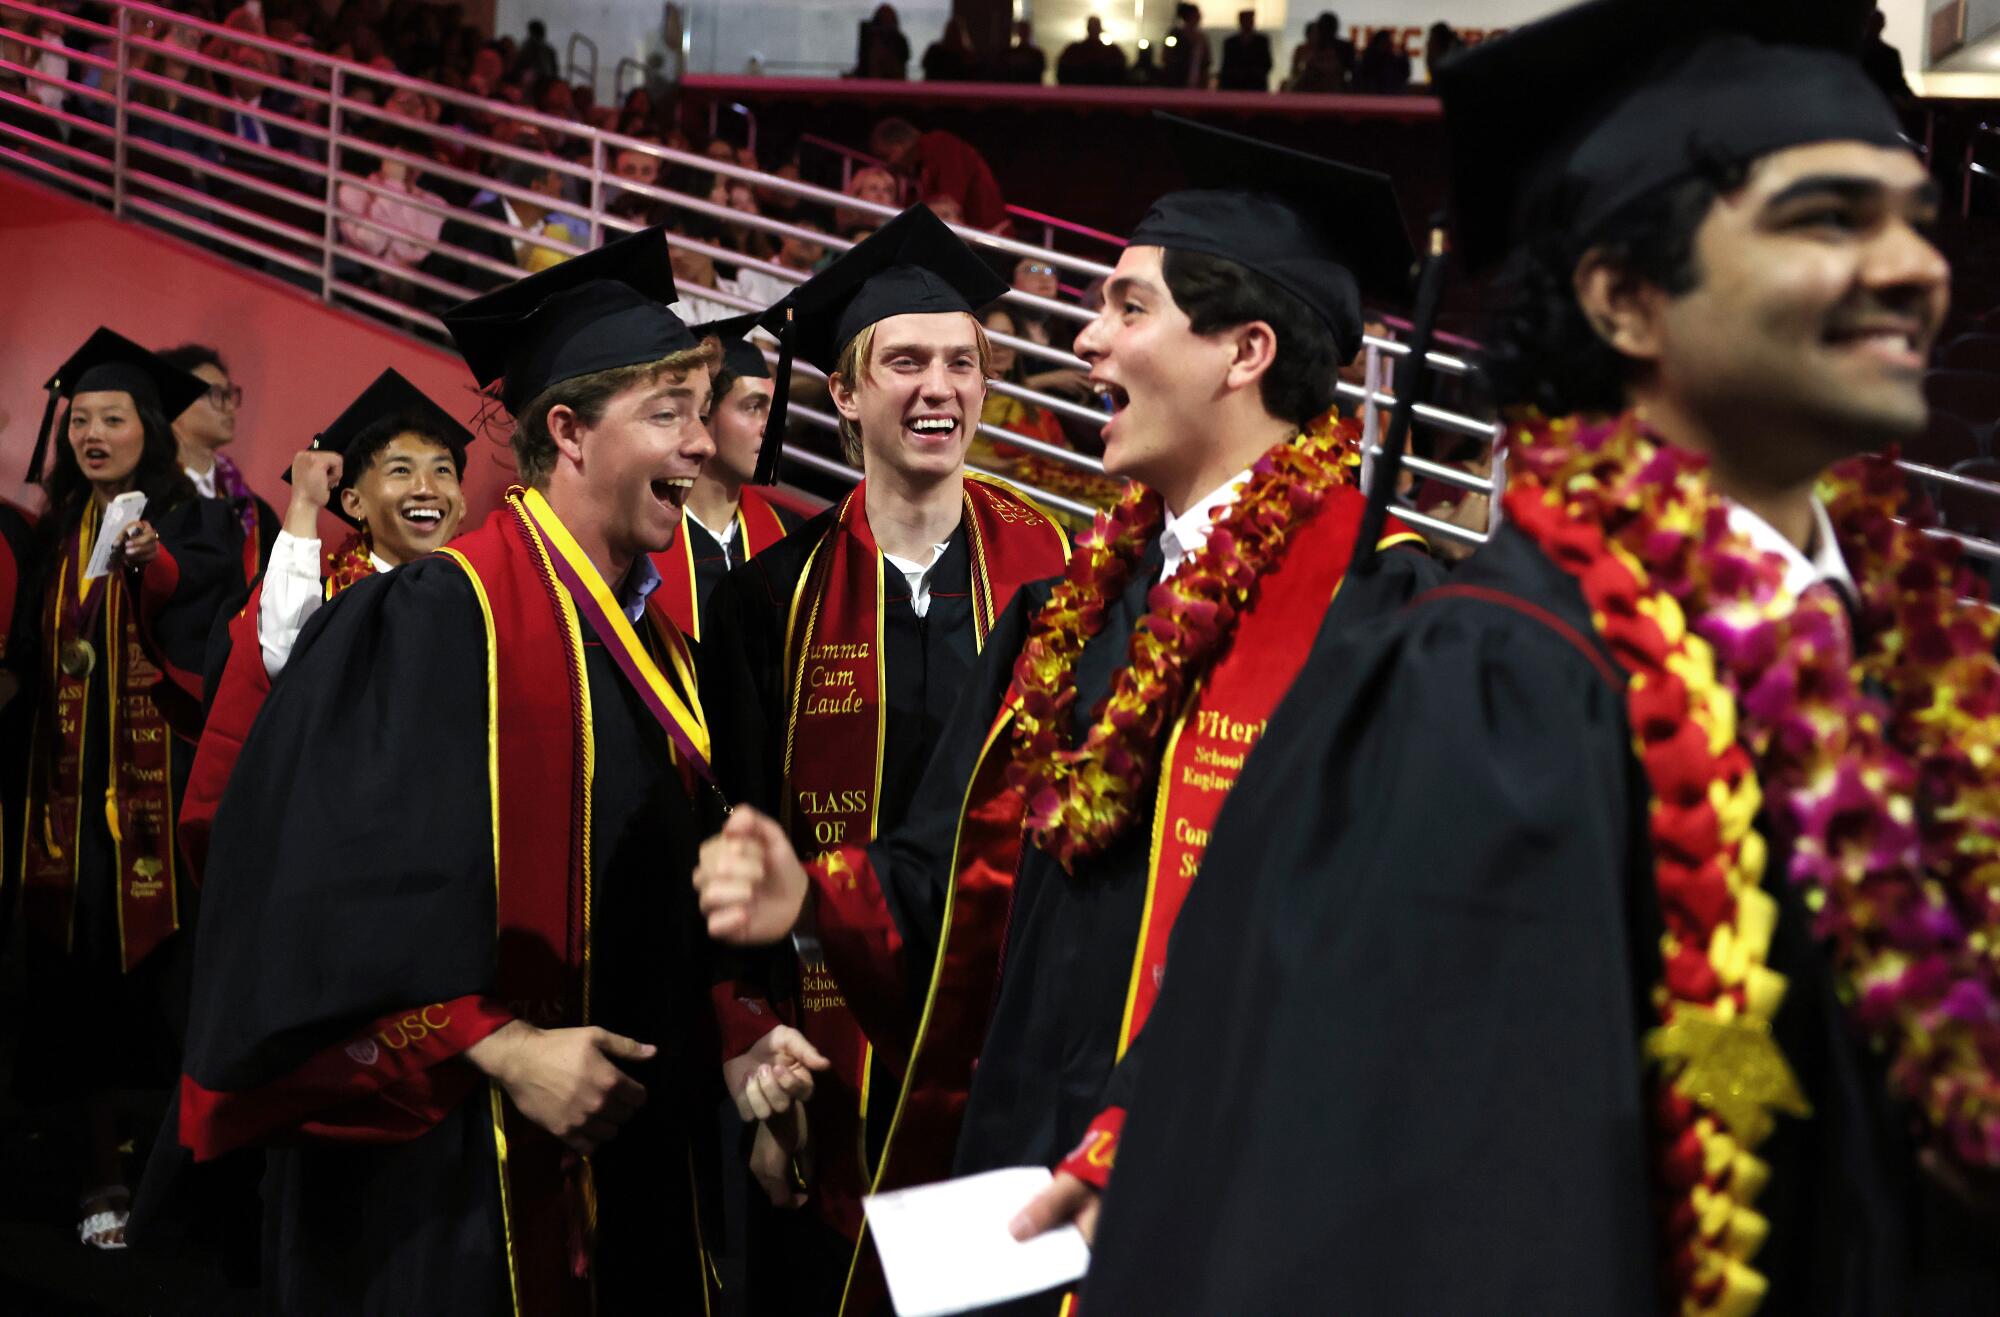 USC graduates smile together in black gowns, mortarboards and sashes with the university's cardinal and gold colors